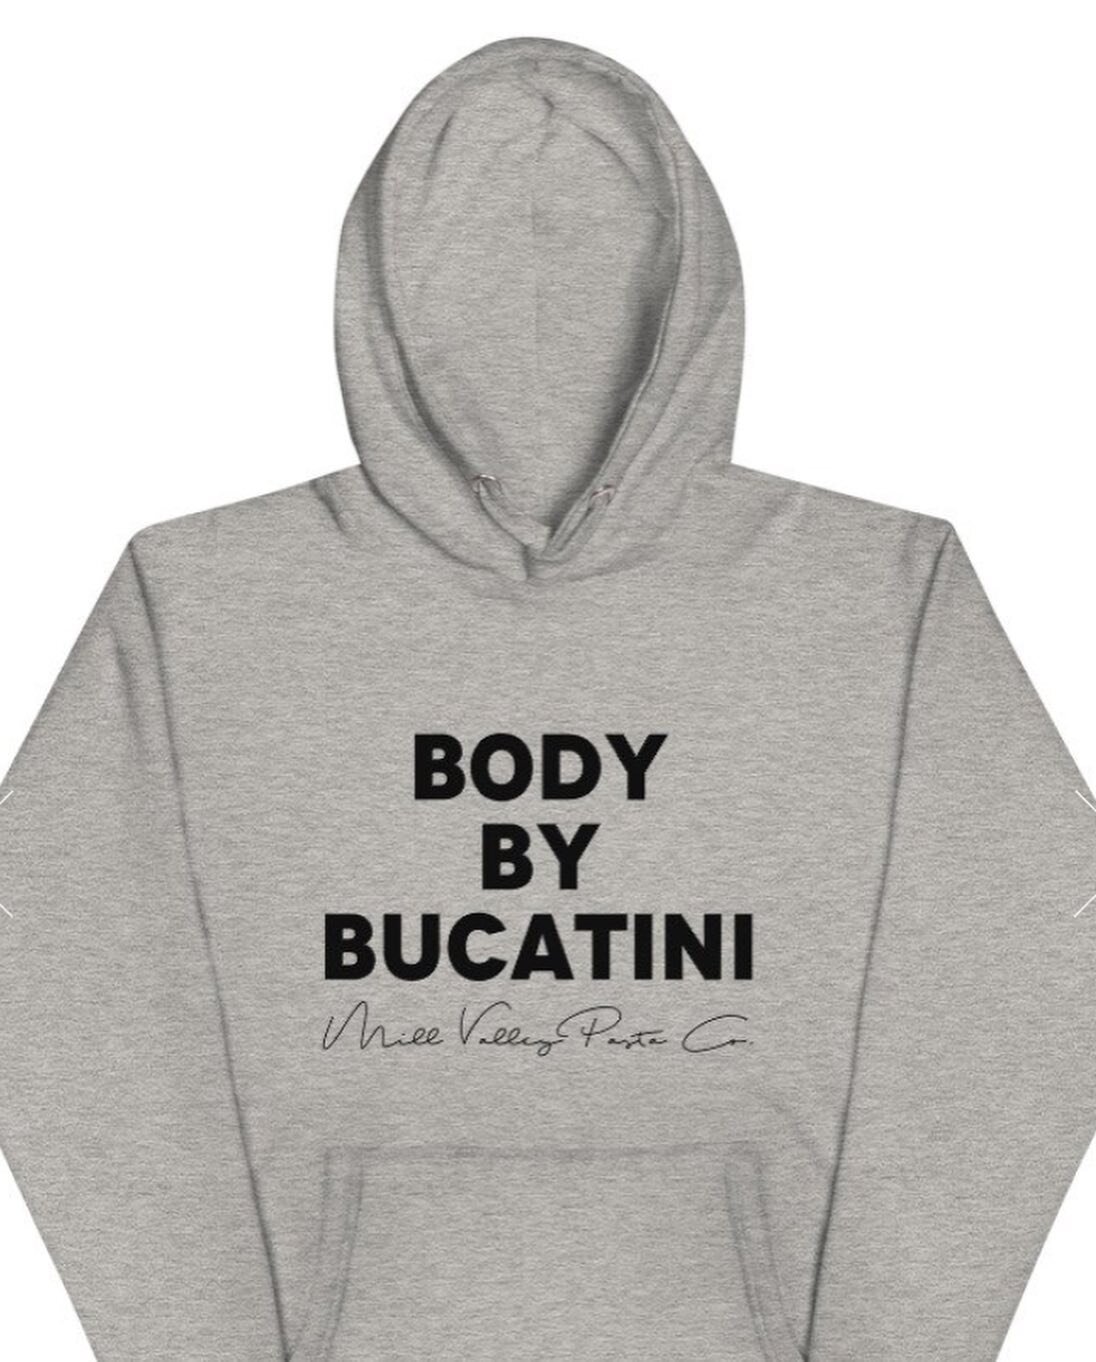 Mill Valley Pasta merch has landed!  Show off your love for all things pasta, prosciutto, burrata and bucatini related!  #pasta #bodybybucatini #burrata #carboholic